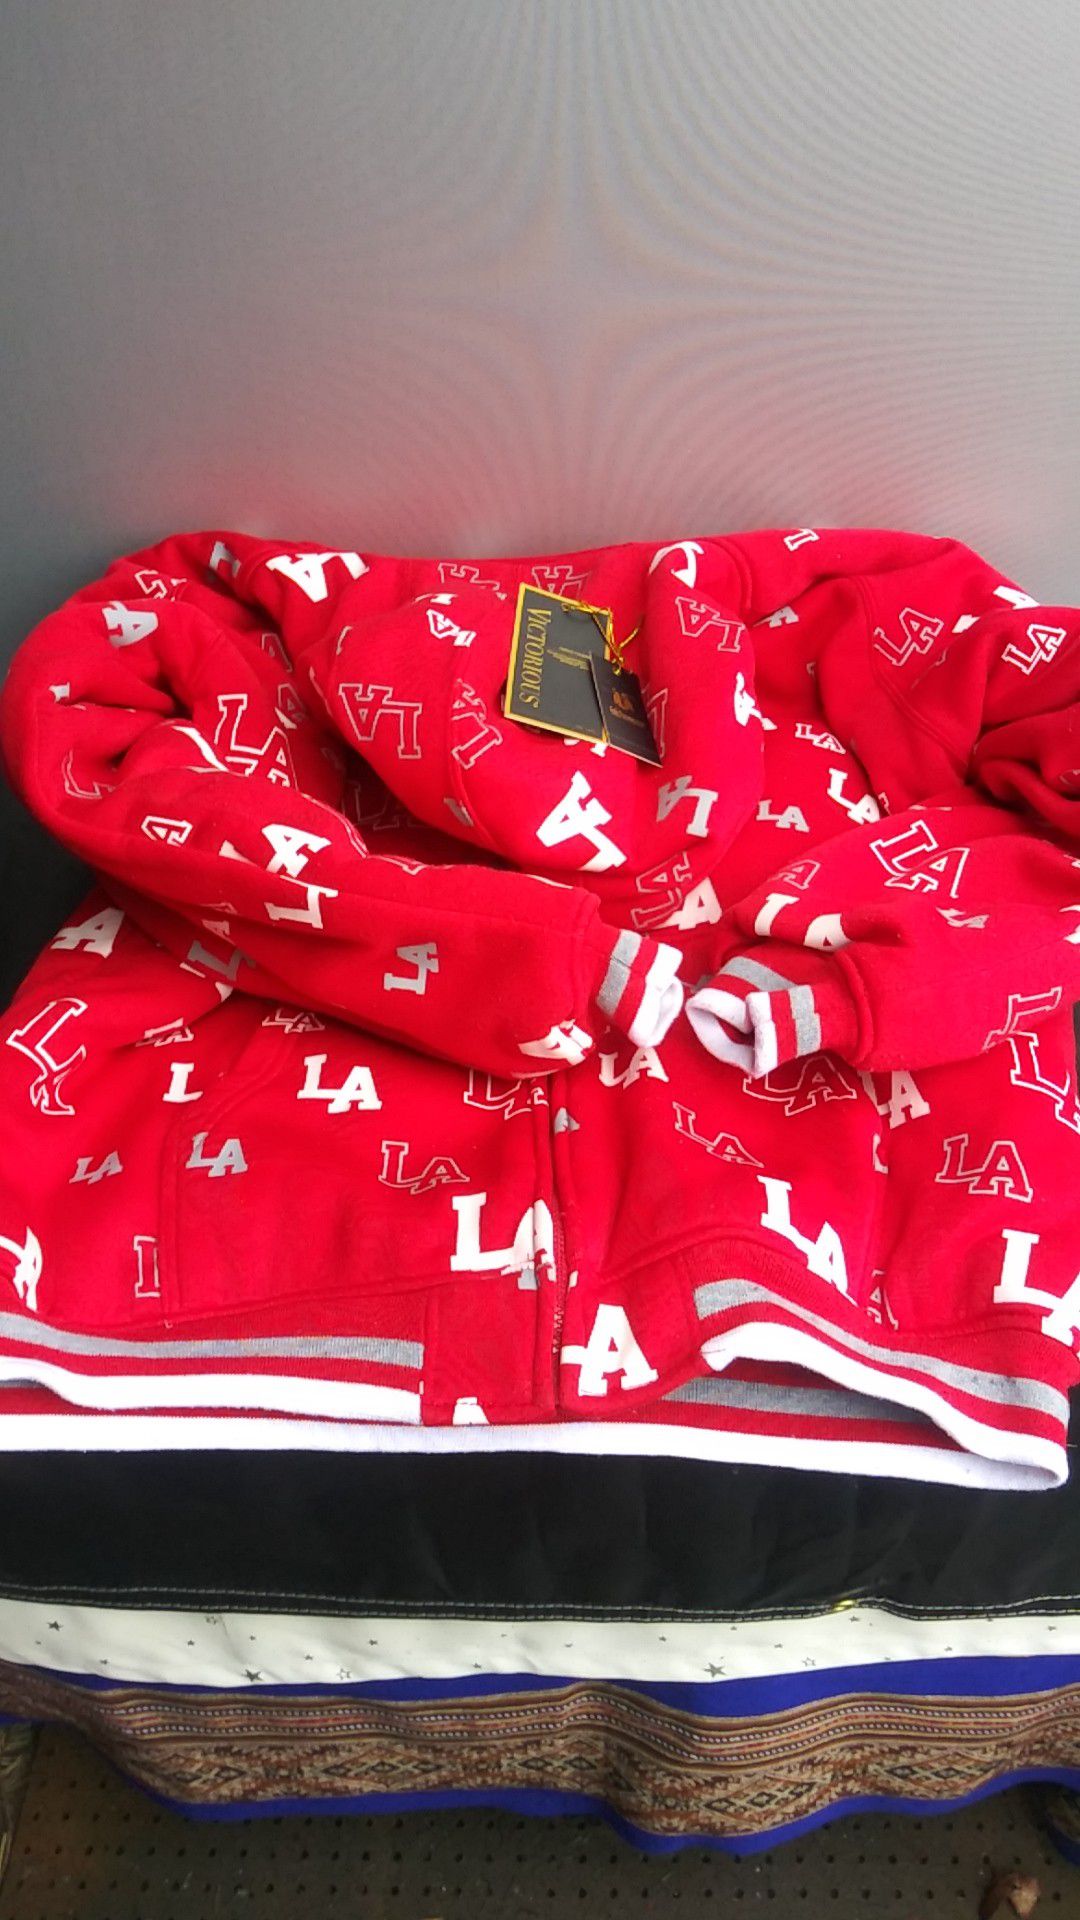 Los Angeles Clippers jacket